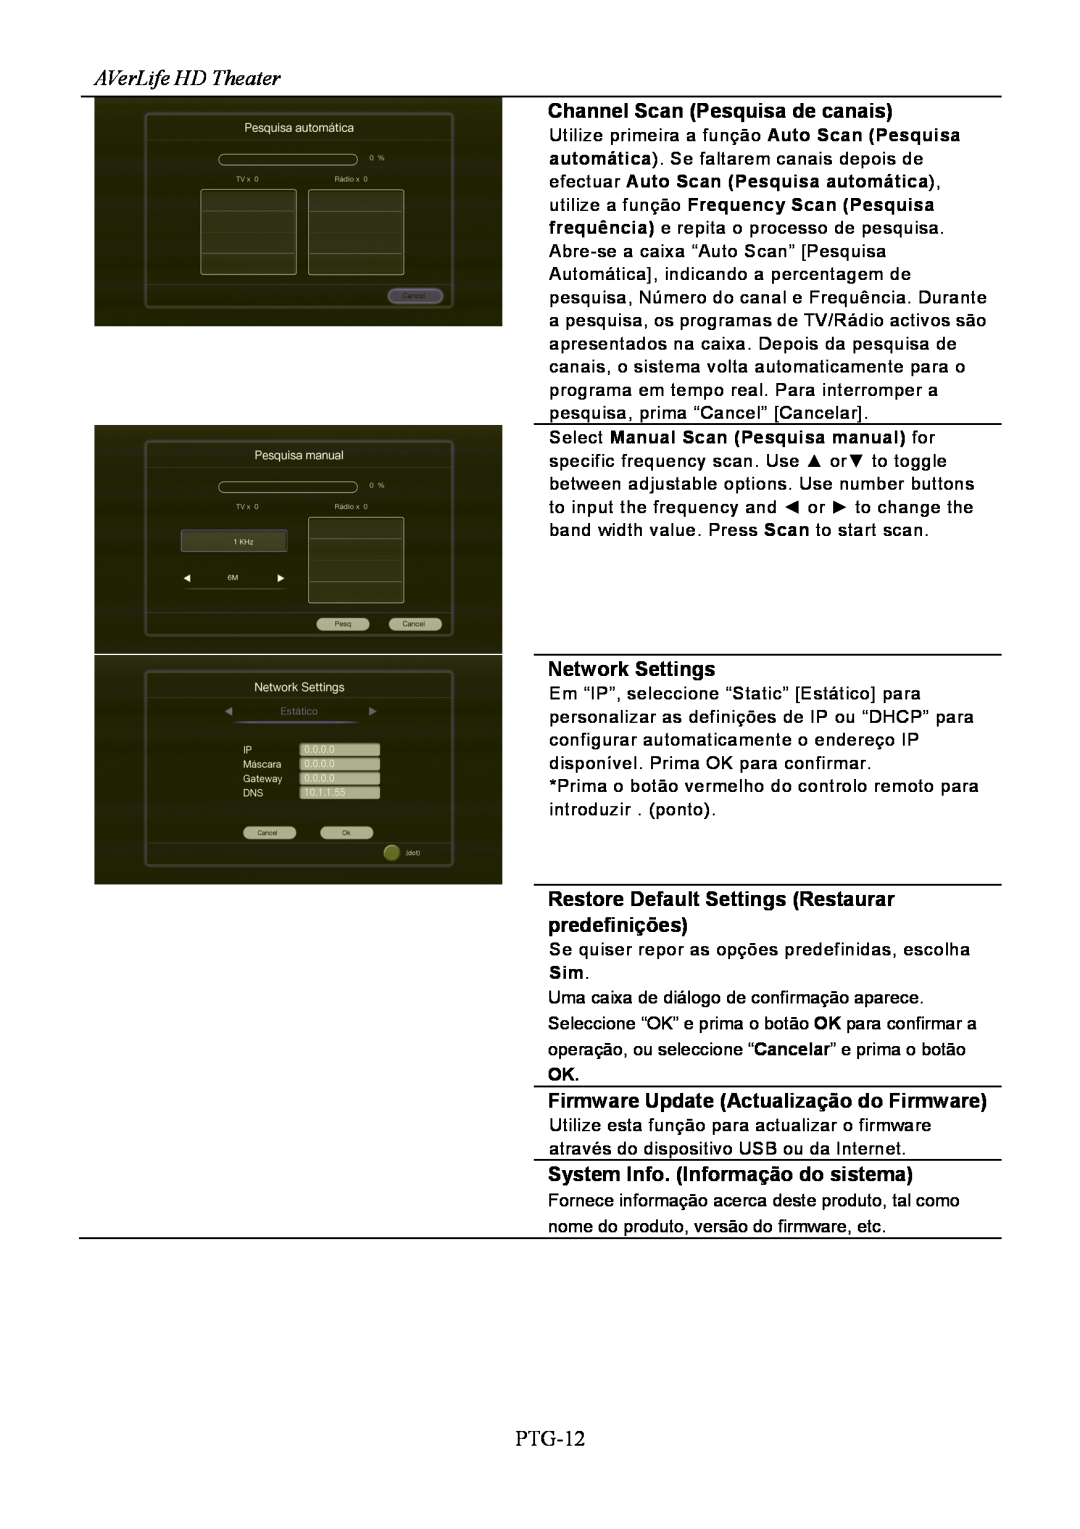 AVerMedia Technologies A211 user manual AVerLife HD Theater, Channel Scan Pesquisa de canais, Network Settings, PTG-12 